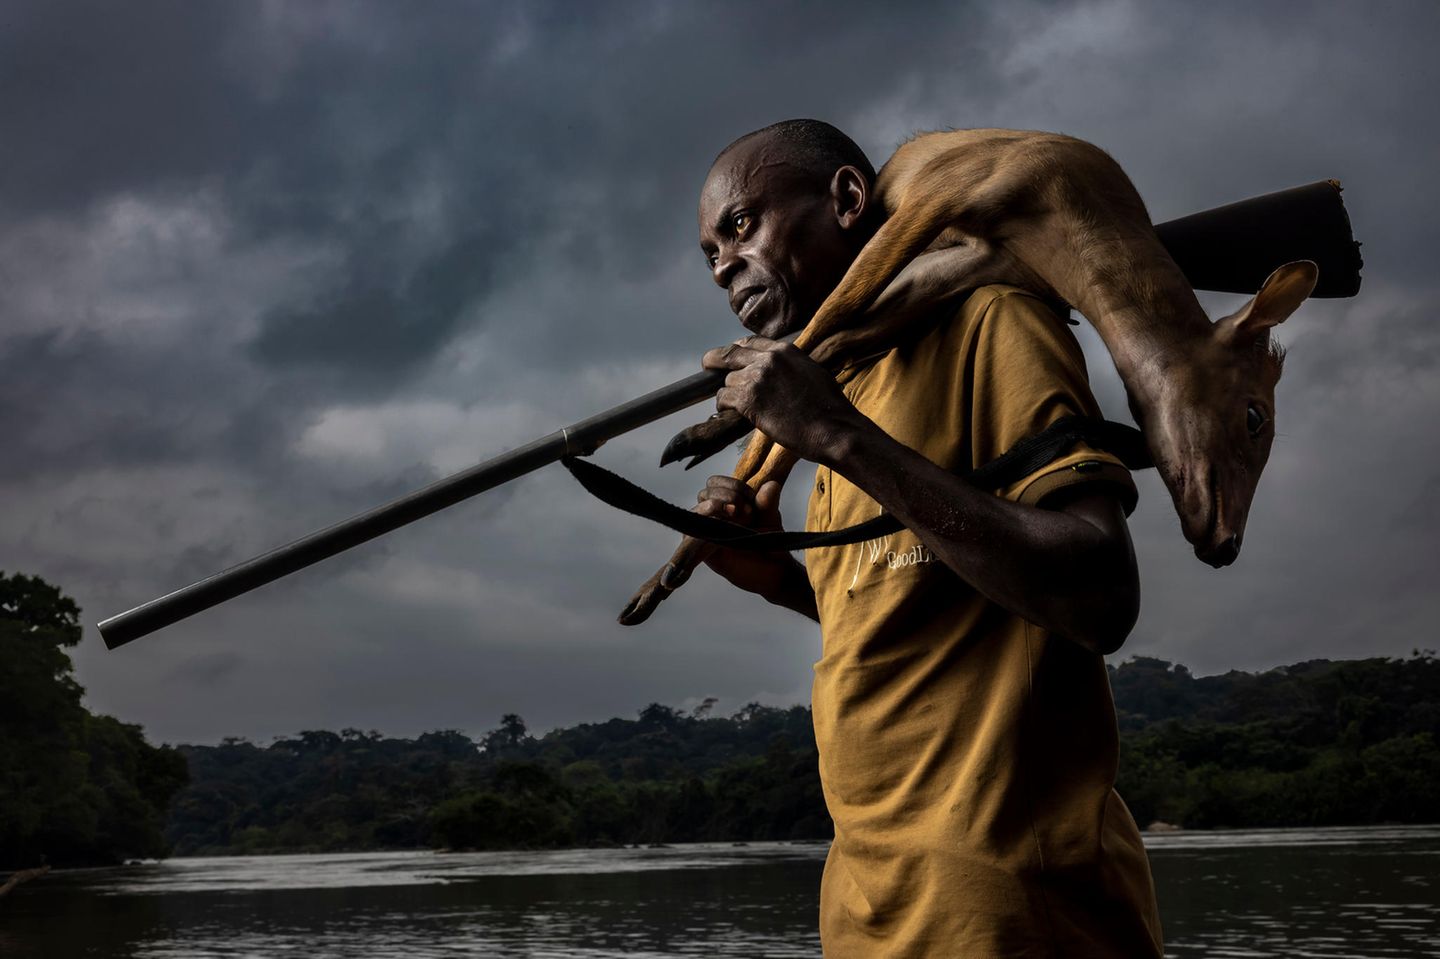 Image Name: Hunters 1  Photographer Name: Brent Stirton  Year: 2022  Image Description: <p>DOUME VILLAGE, LASTOURSVILLE, GABON, 29 JUNE 2021: Expert bushmeat hunter Nkani Mbou Mboudin is seen with an antelope he just shot hunting in the forest around his village. This village survives on fishing and bushmeat. Gabon has a sustainable bushmeat culture, largely because of its small population and large protected habitats.</p>  Series Name: Bushmeat Hunters  Series Description: This is a series of bushmeat hunter portraits taken in Guyana, Gabon, the Democratic Republic of Congo and the Republic of Congo. These men are seen in an age-old act, bringing animals they have hunted back to their villages. Some of these men are hunting for other, wealthier men who have employed them, others are hunting for their families. In all cases, very little of what they hunted was consumed in the village. Bushmeat commands a high price, which increases as it gets to major cities. These days, hunting of this kind is almost always about an economy of supply and demand.